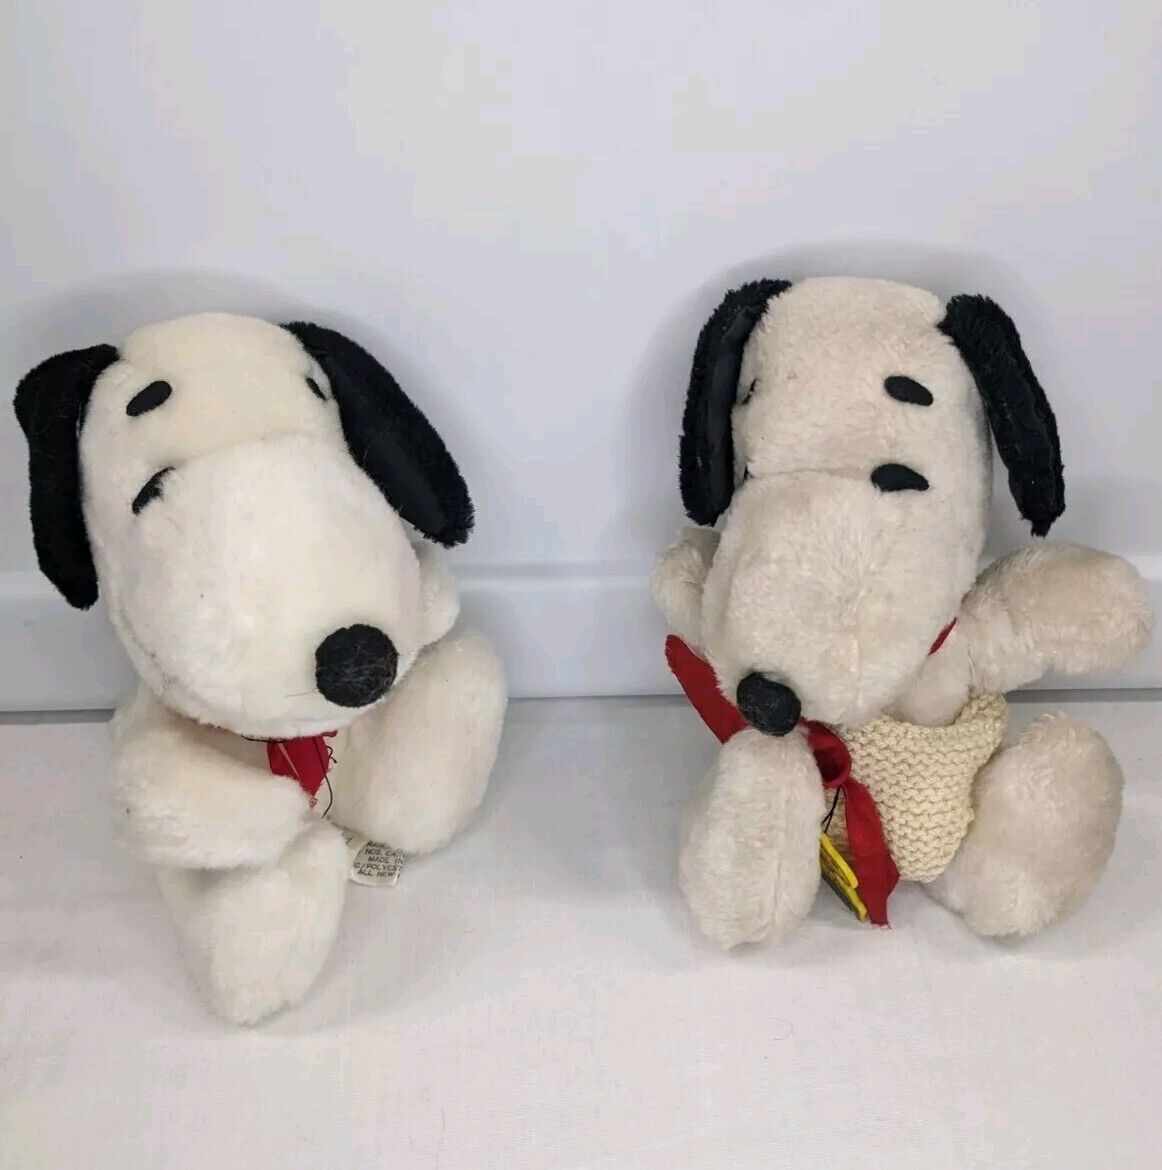 2 x Vintage 1968 Snoopy Plush United Feature Syndicate Stuffed Dog Peanuts Toys